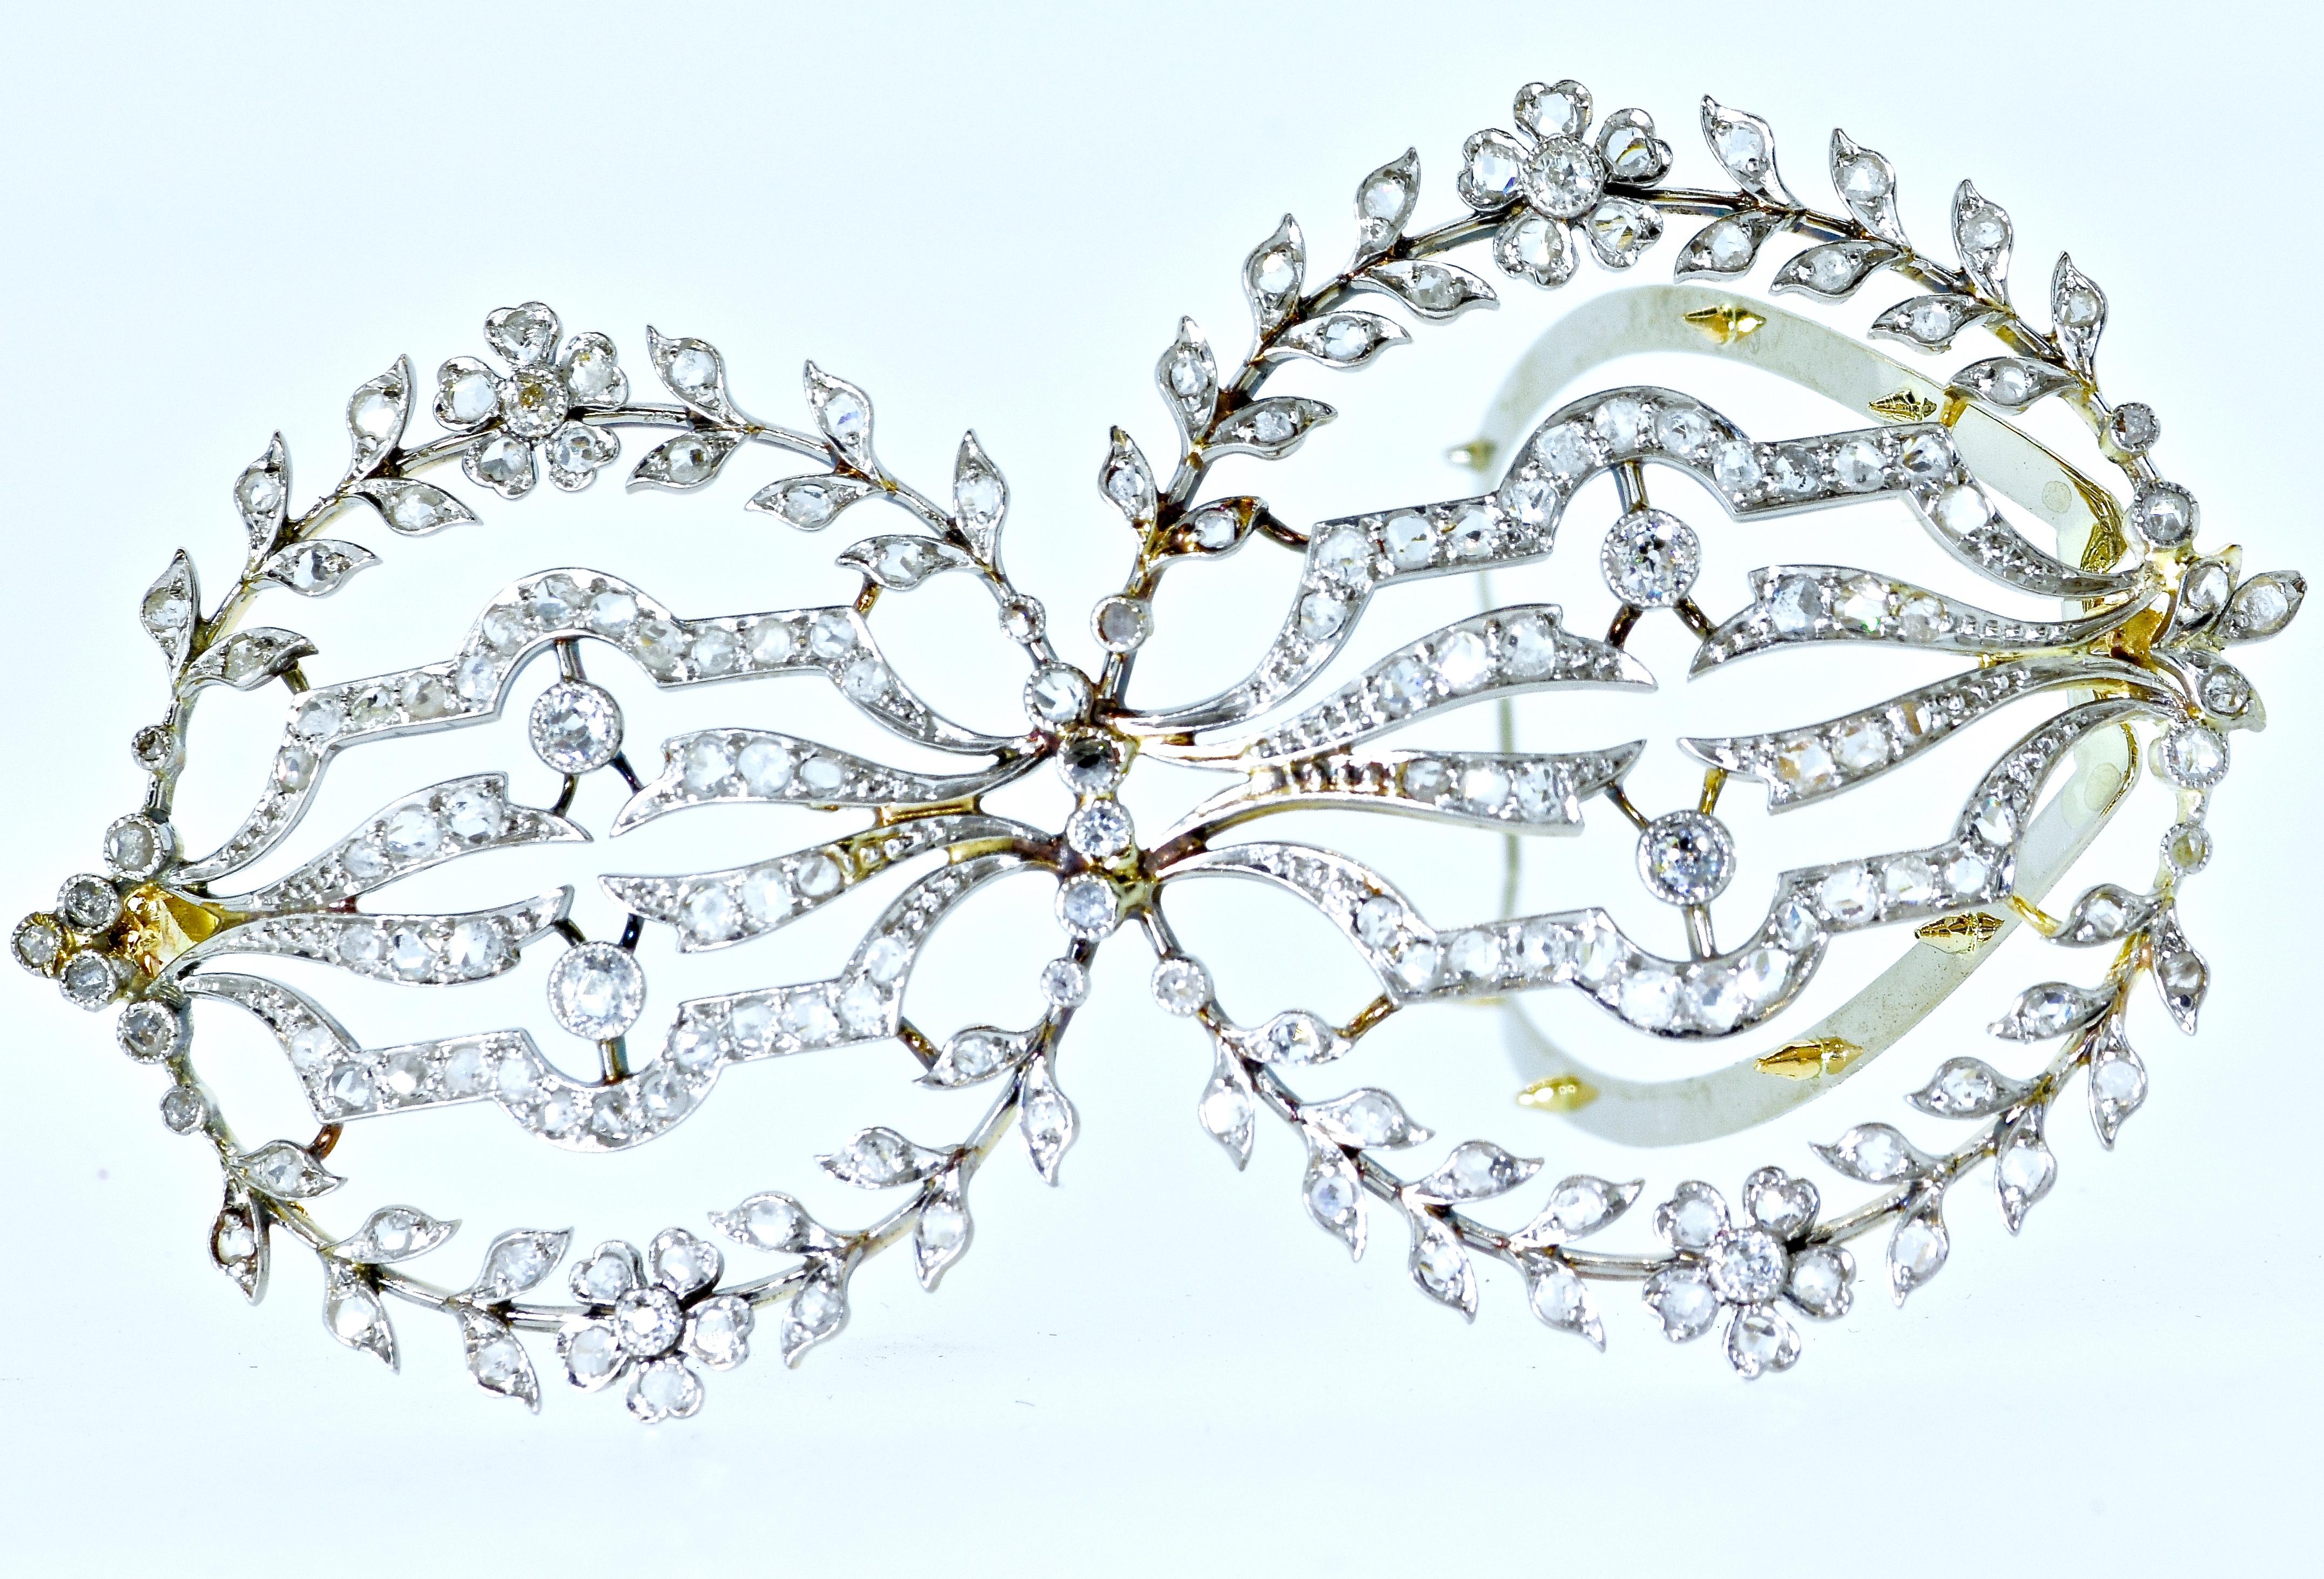 Antique diamond hair barrette with both rose cut and mine cut diamonds set in platinum and backed with yellow gold.  This Edwardian barrette is 3 inches in length with an unusual asymmetrical floral design.  Delicate and unusual, this distinctive